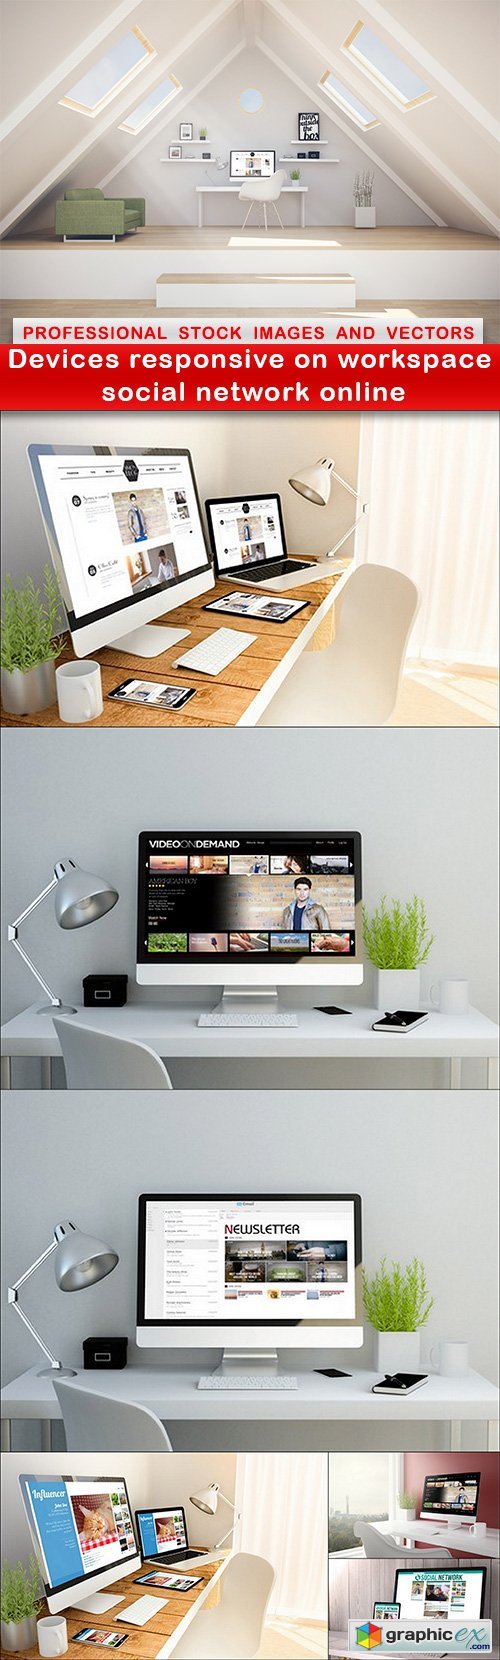 Devices responsive on workspace social network online - 7 UHQ JPEG